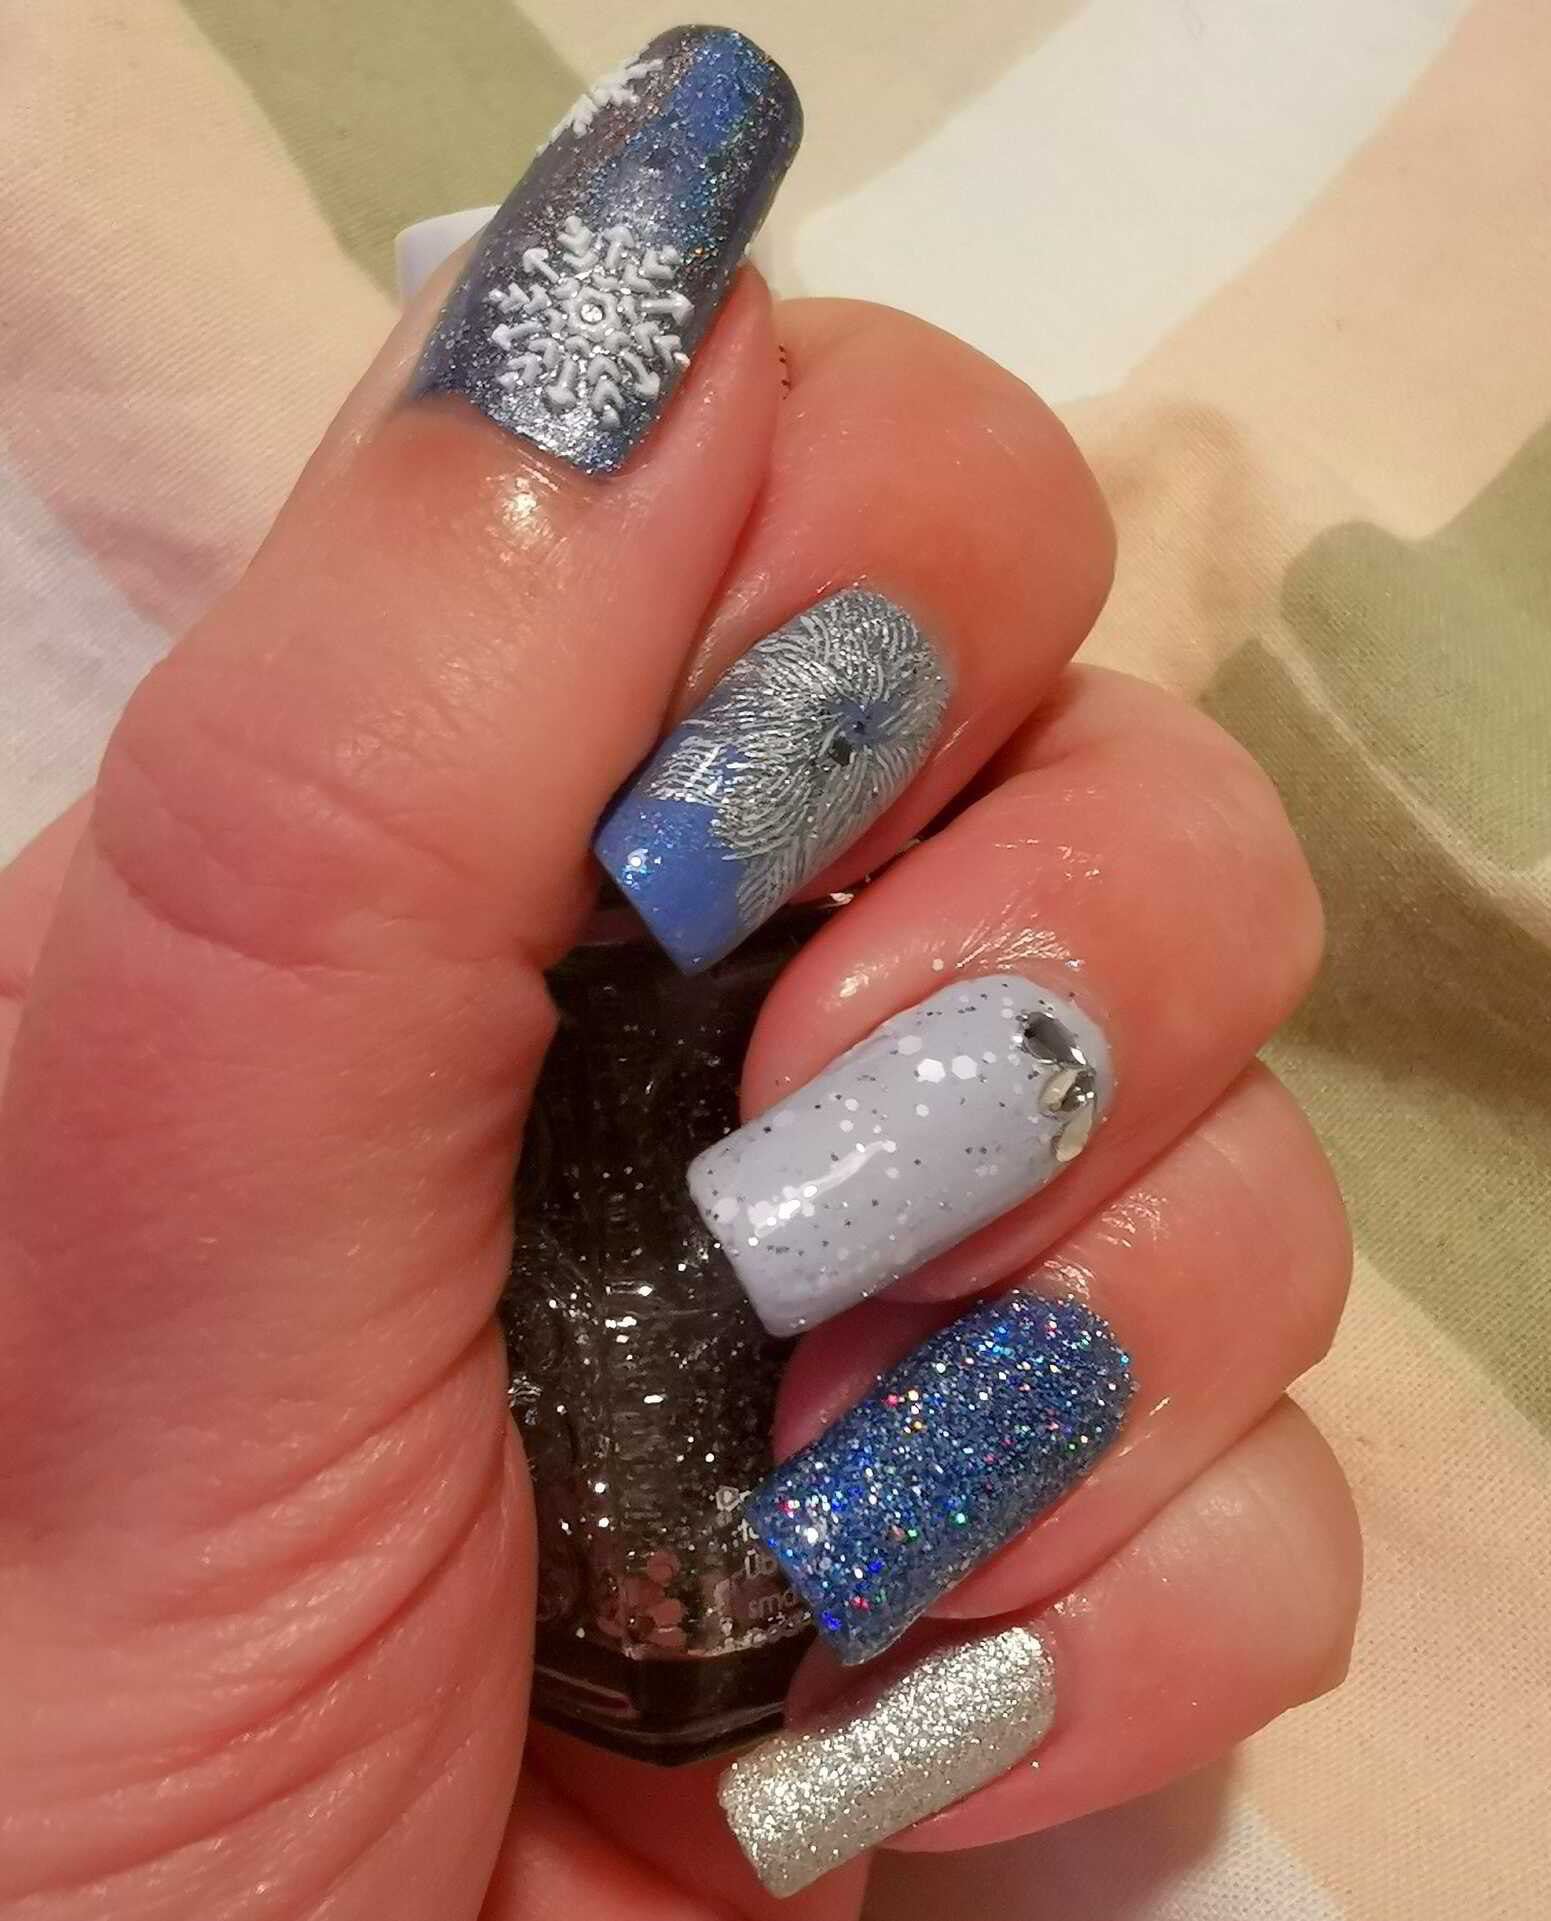 Nail polish manicure of shade essie Set in Stones, Moyra Chrome Silver,Colour Alike Quiet Gray,Zoya Dallas,piCture pOlish Bluebird (Reborn),OPI I Am What I Amethyst,Holo Taco Frost Light,Color Club Now Is The Time,Color Club Oh The Irony,Flormar Stylish Silver